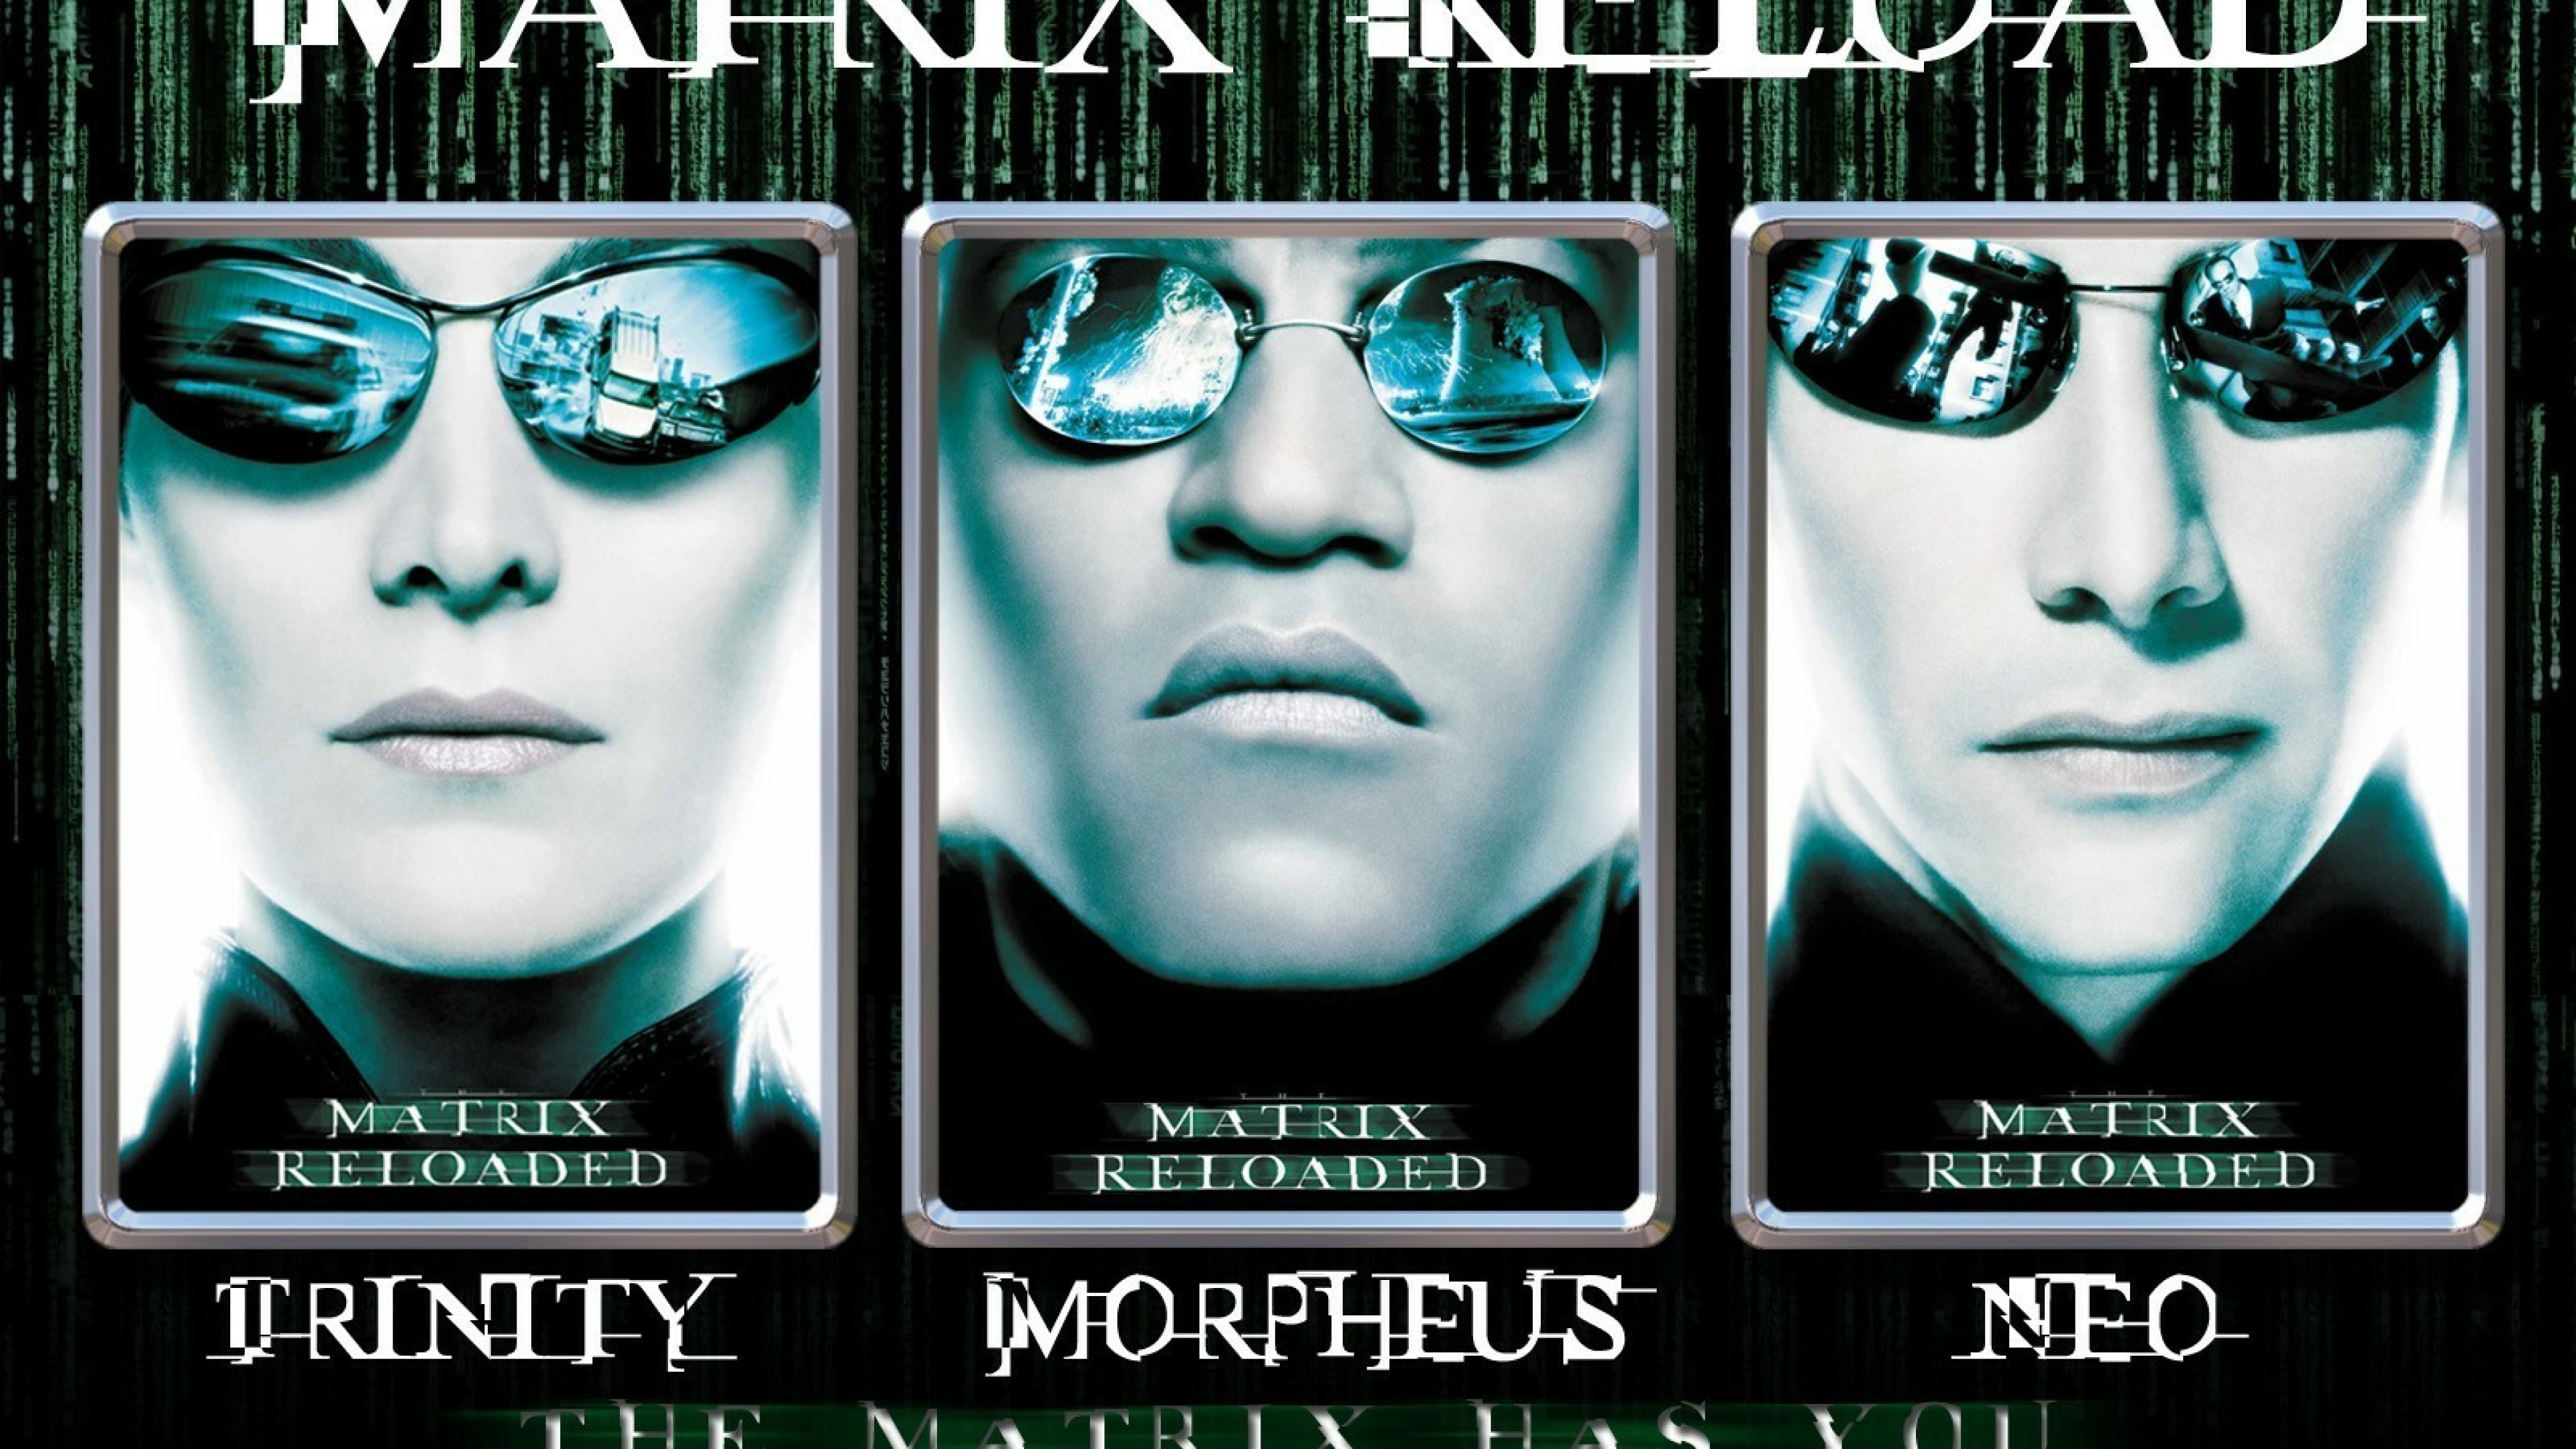 The Matrix Movie Wallpapers